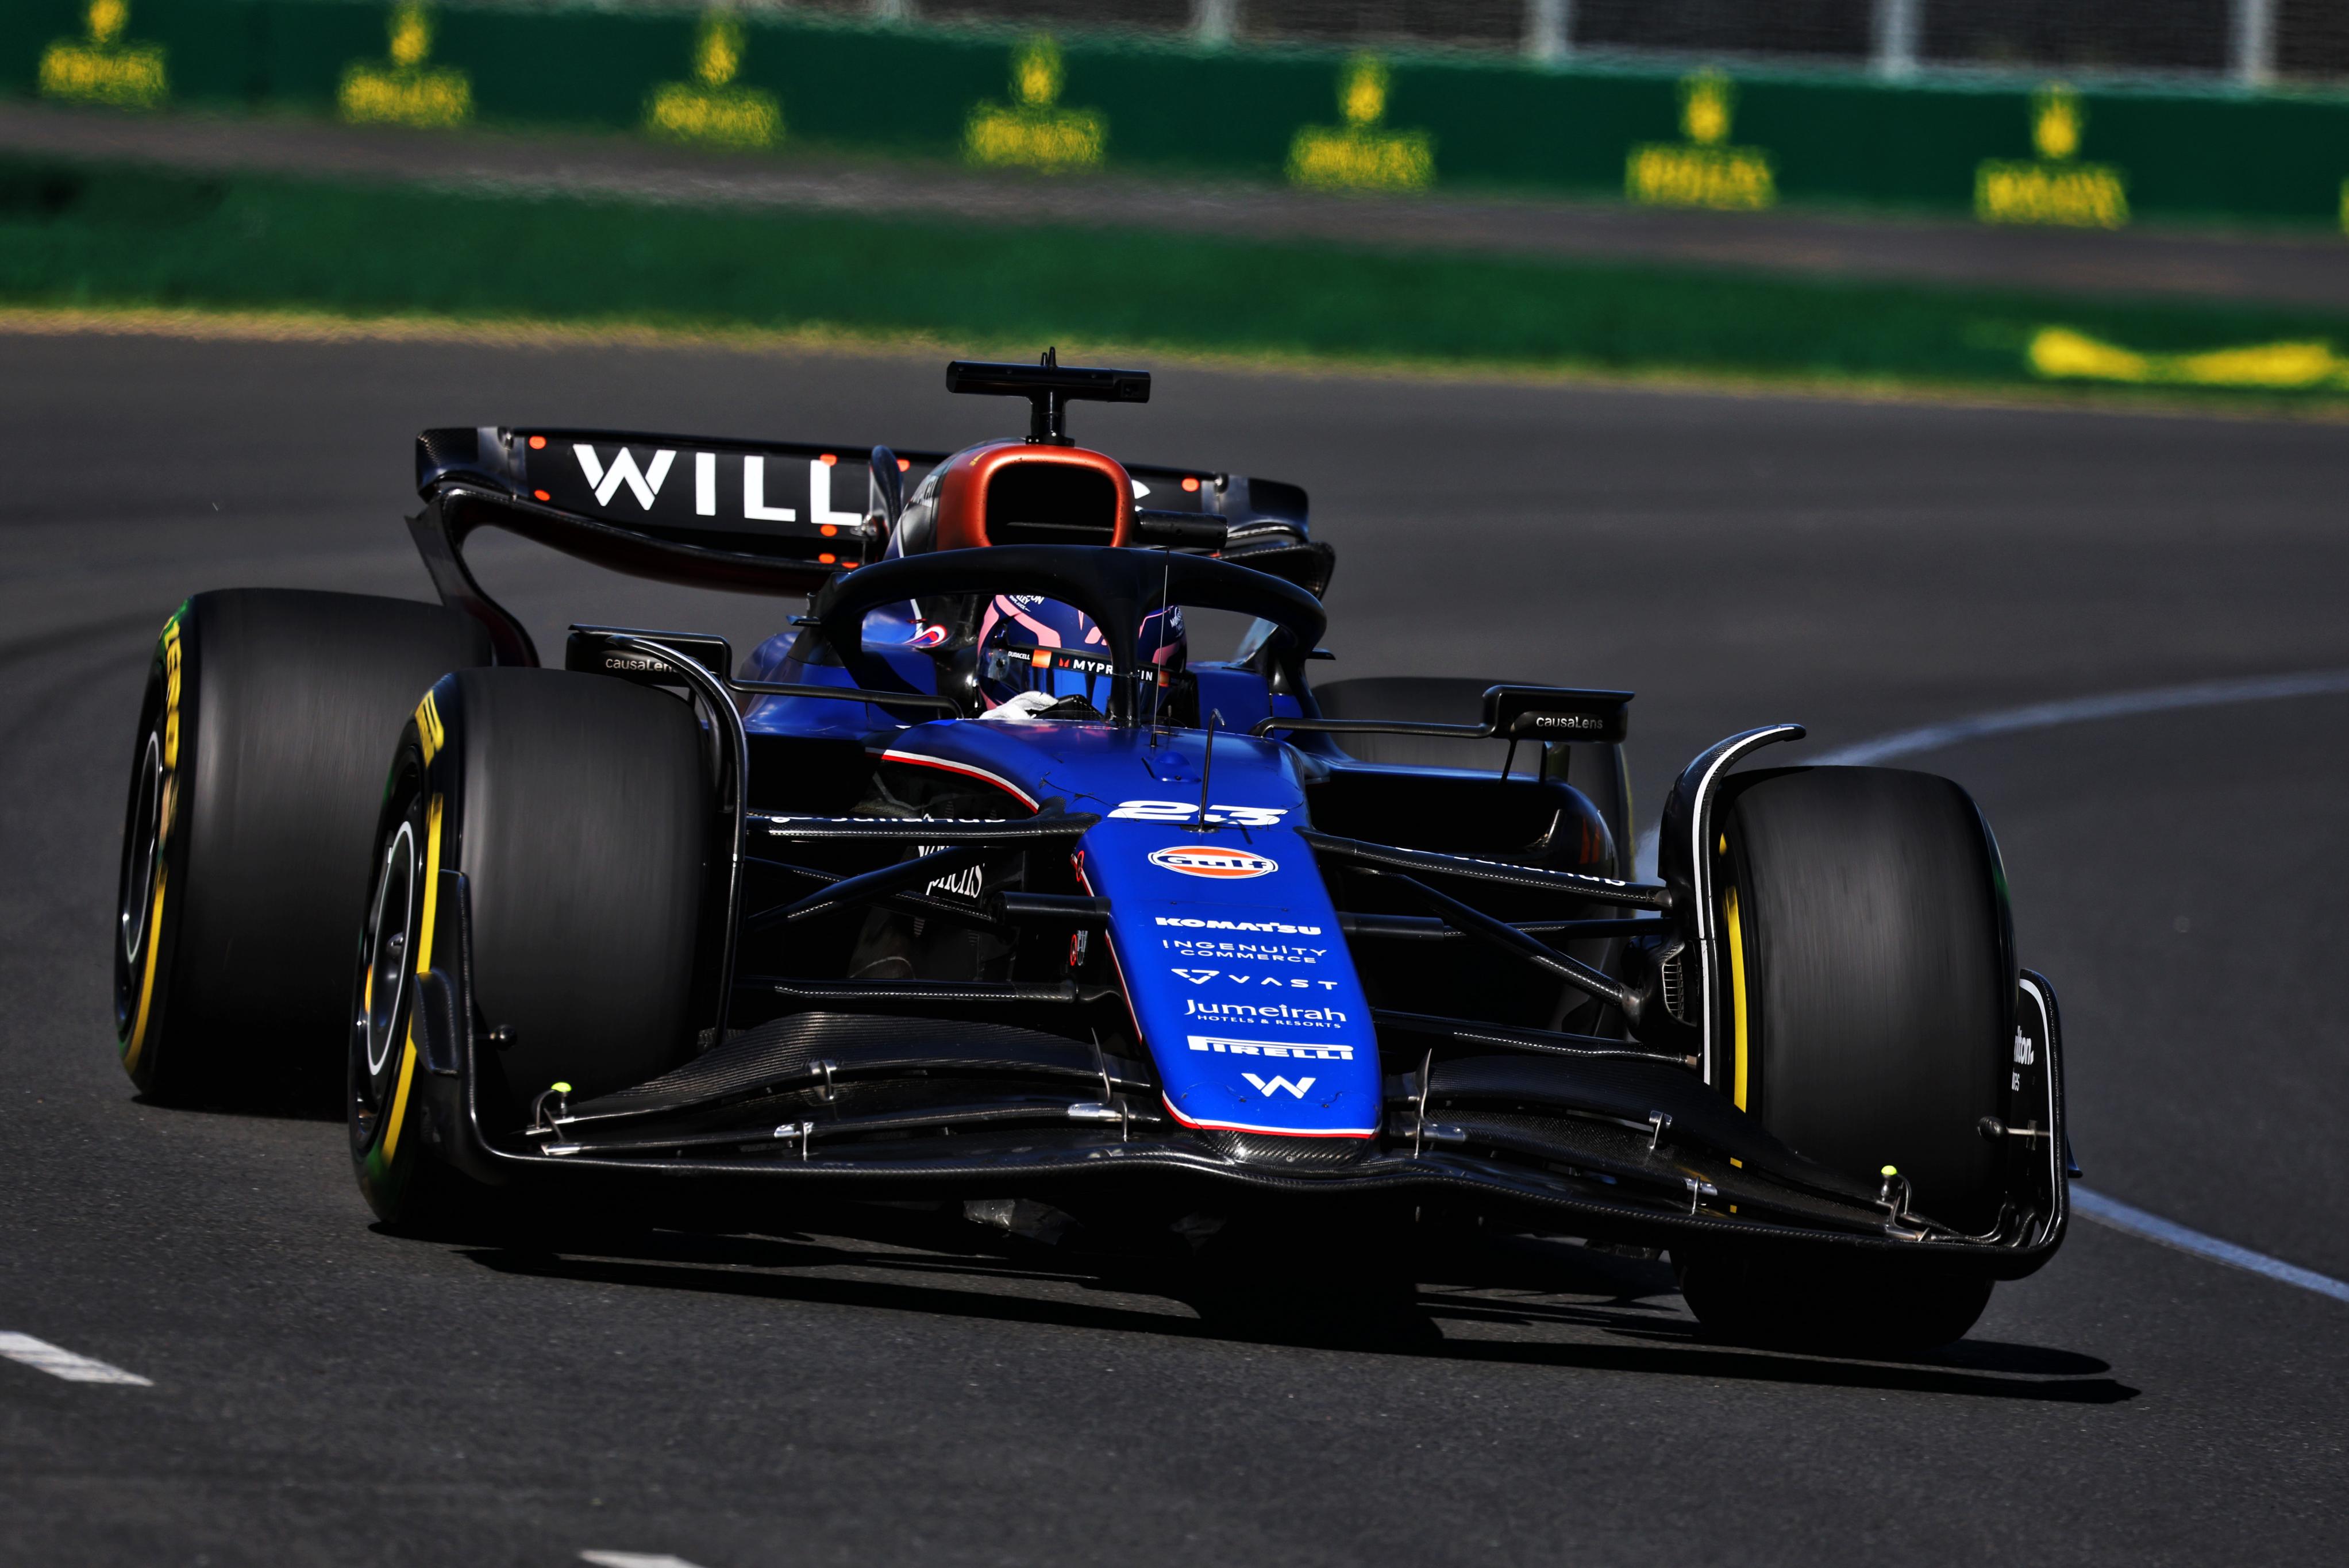 'Williams also has no spare chassis for Japan Grand Prix' GPblog